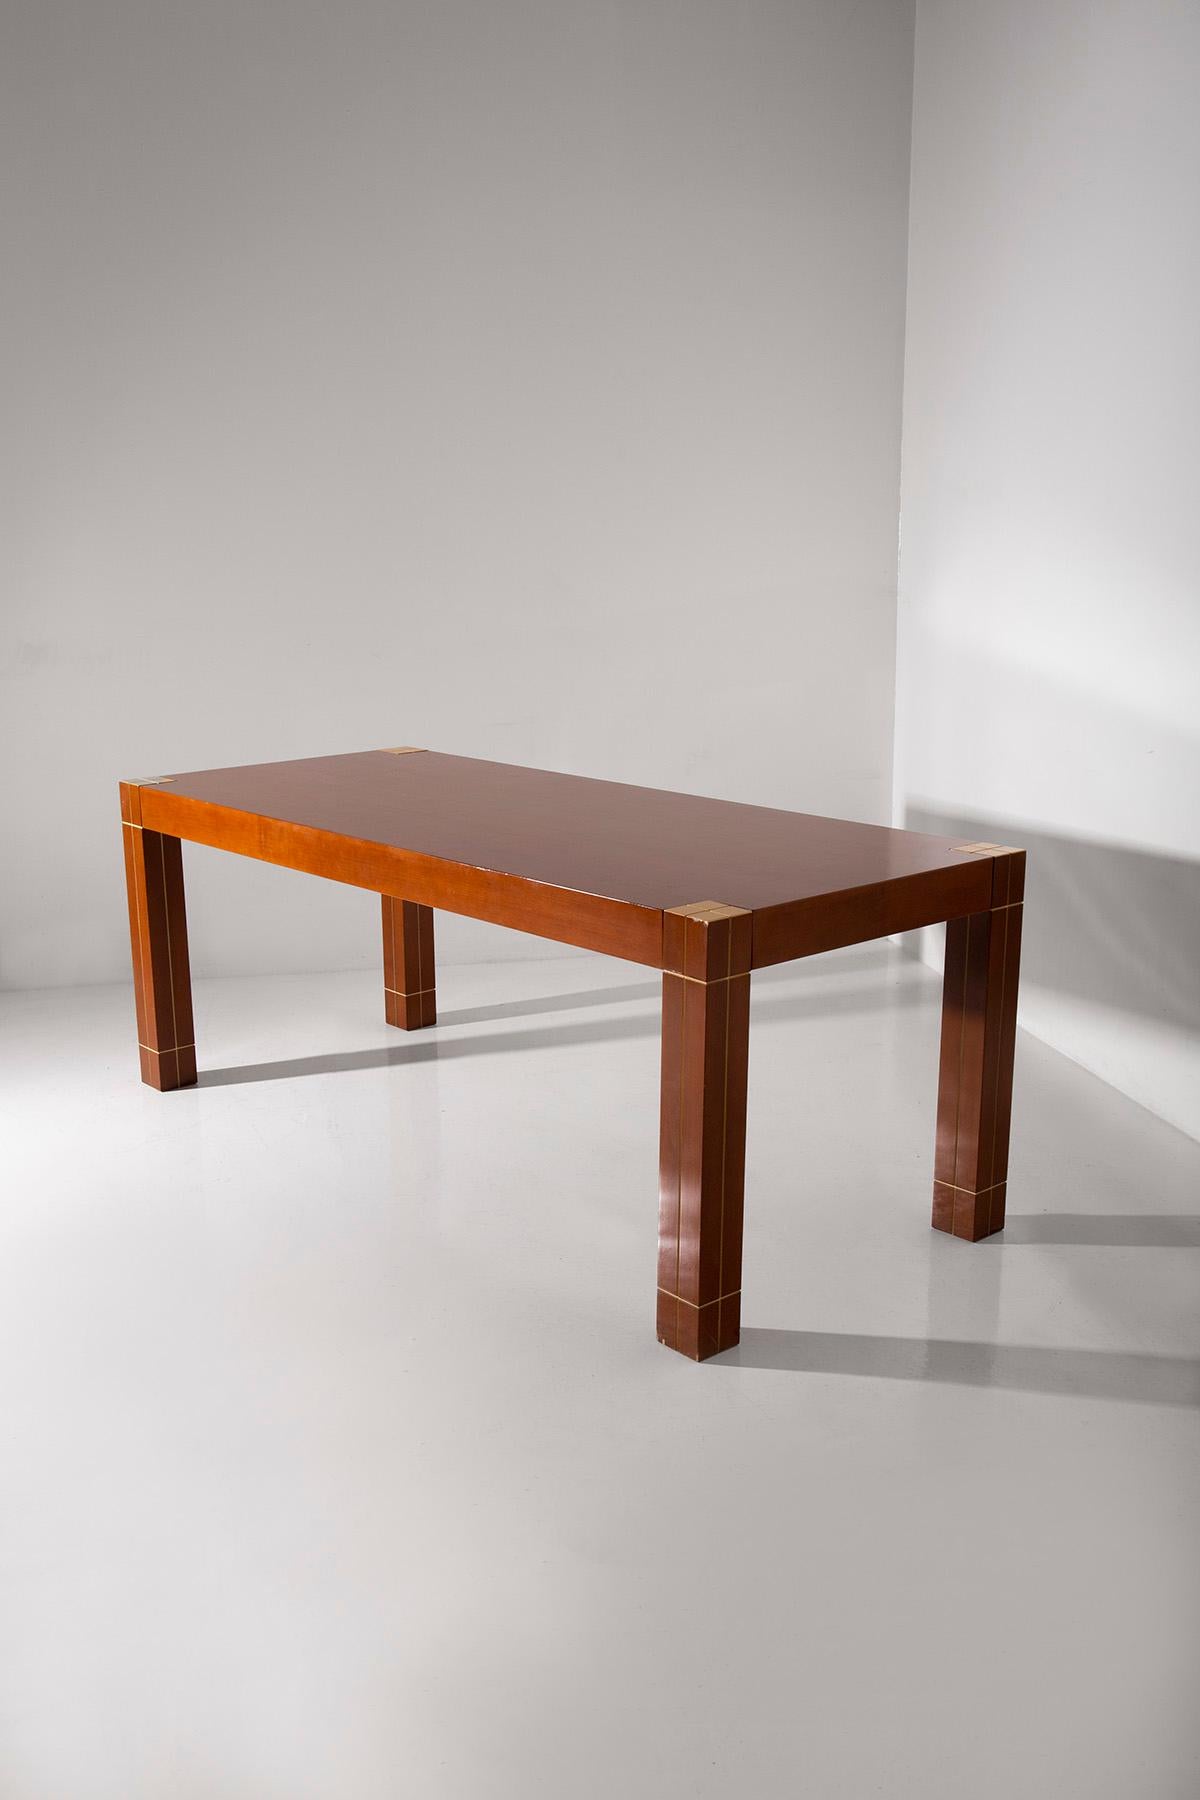 In the dazzling era of the 1980s, Italian design reached new heights, and this elegant Italian table, reminiscent of the style of the renowned Renato Polidori, emerged as a masterpiece of that period. It's a piece that not only captures the essence